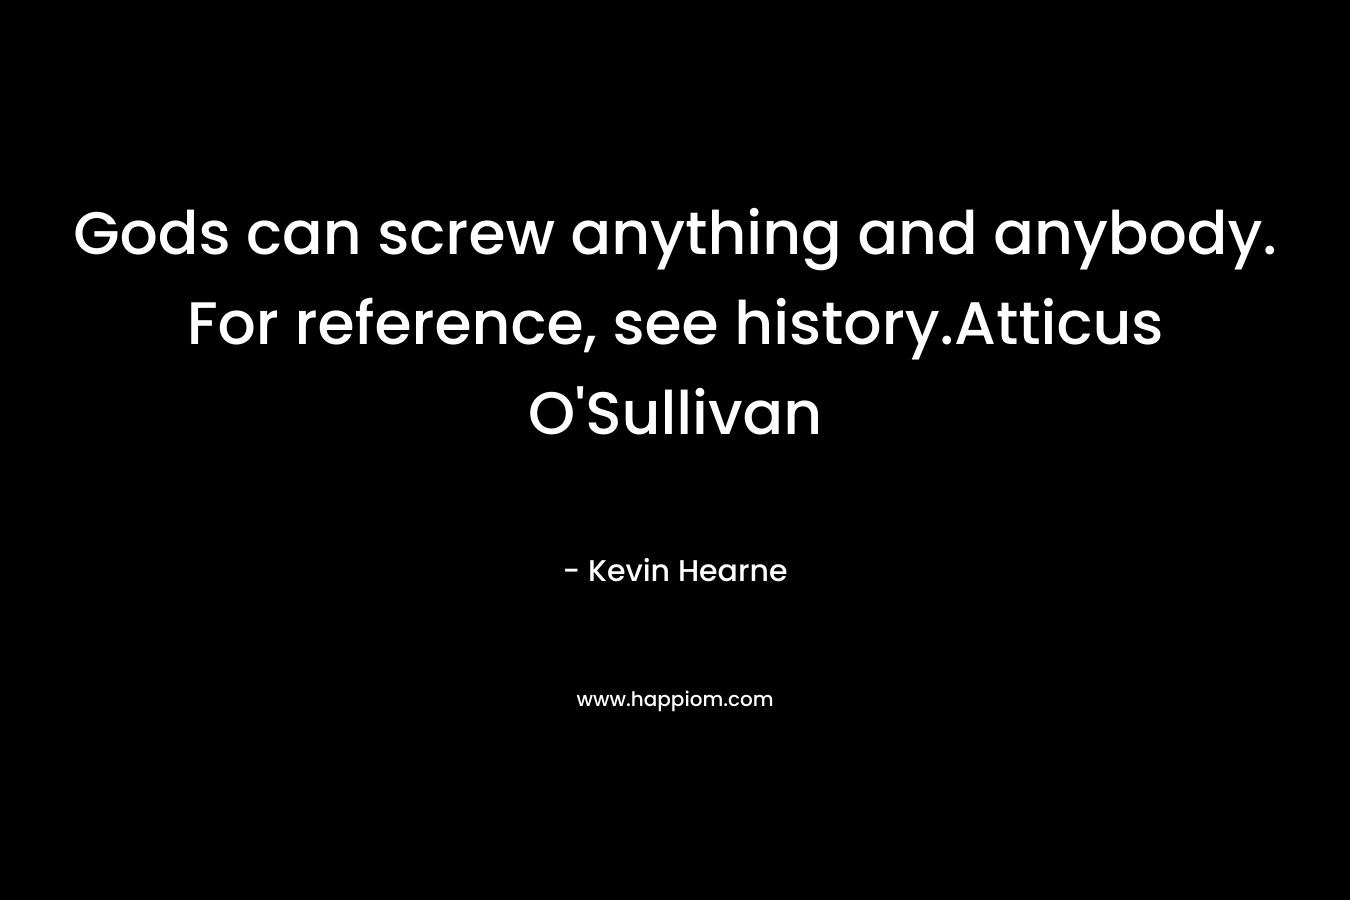 Gods can screw anything and anybody. For reference, see history.Atticus O’Sullivan – Kevin Hearne